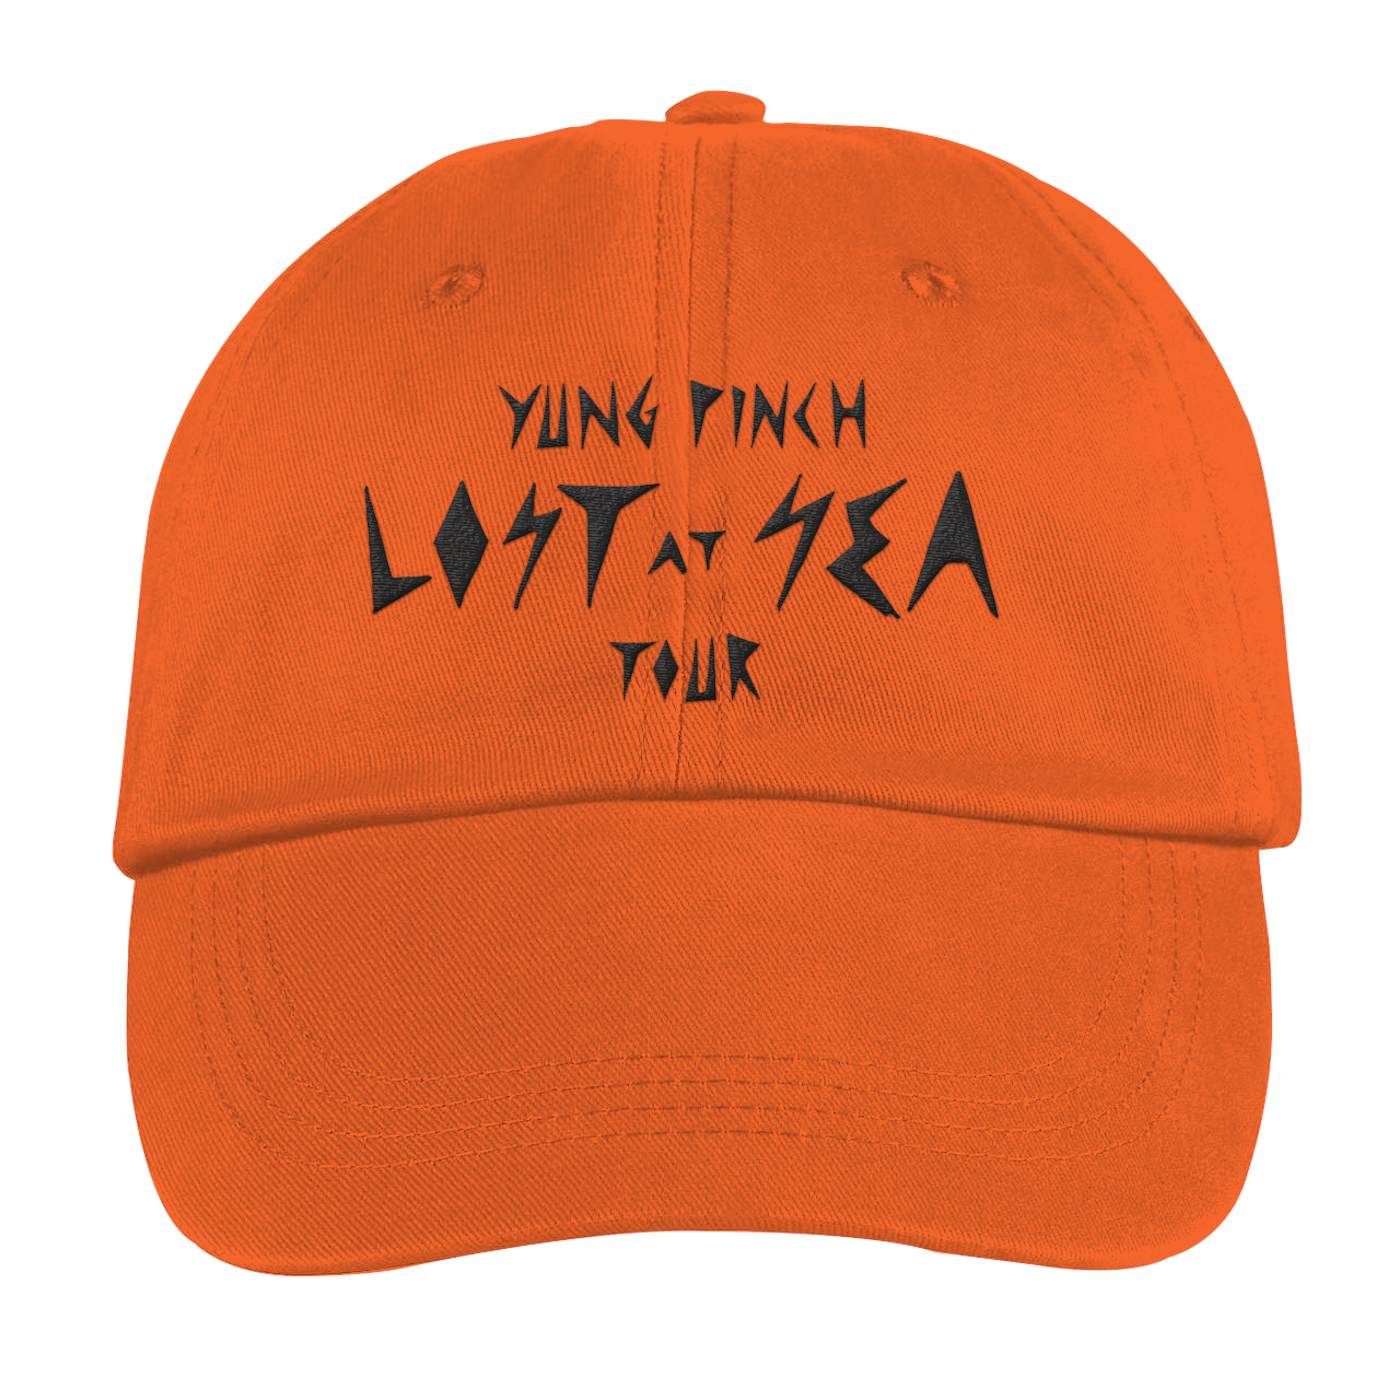 Yung Pinch Lost At Sea Tour Dad Hat